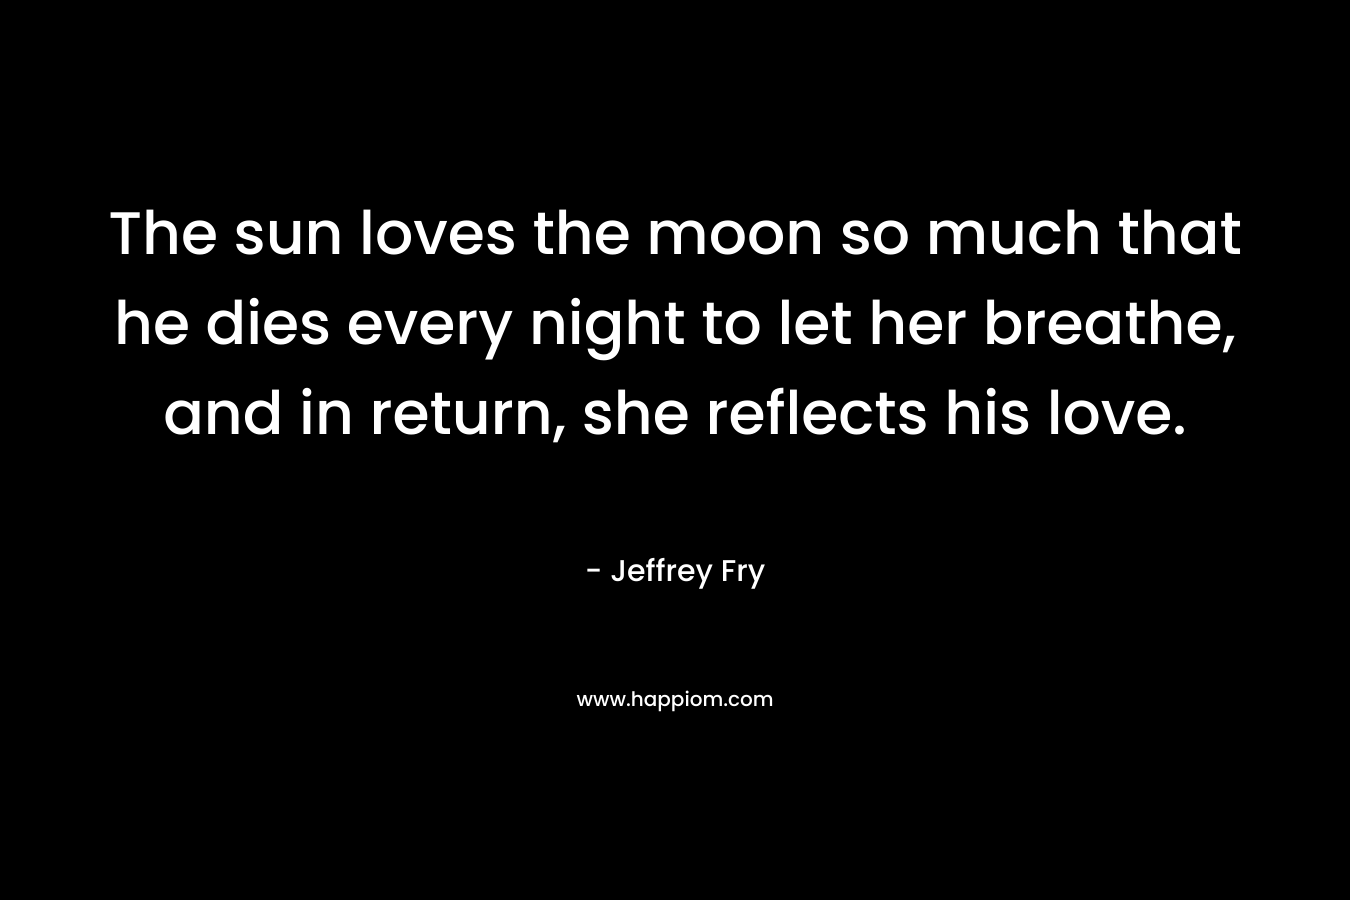 The sun loves the moon so much that he dies every night to let her breathe, and in return, she reflects his love. – Jeffrey Fry